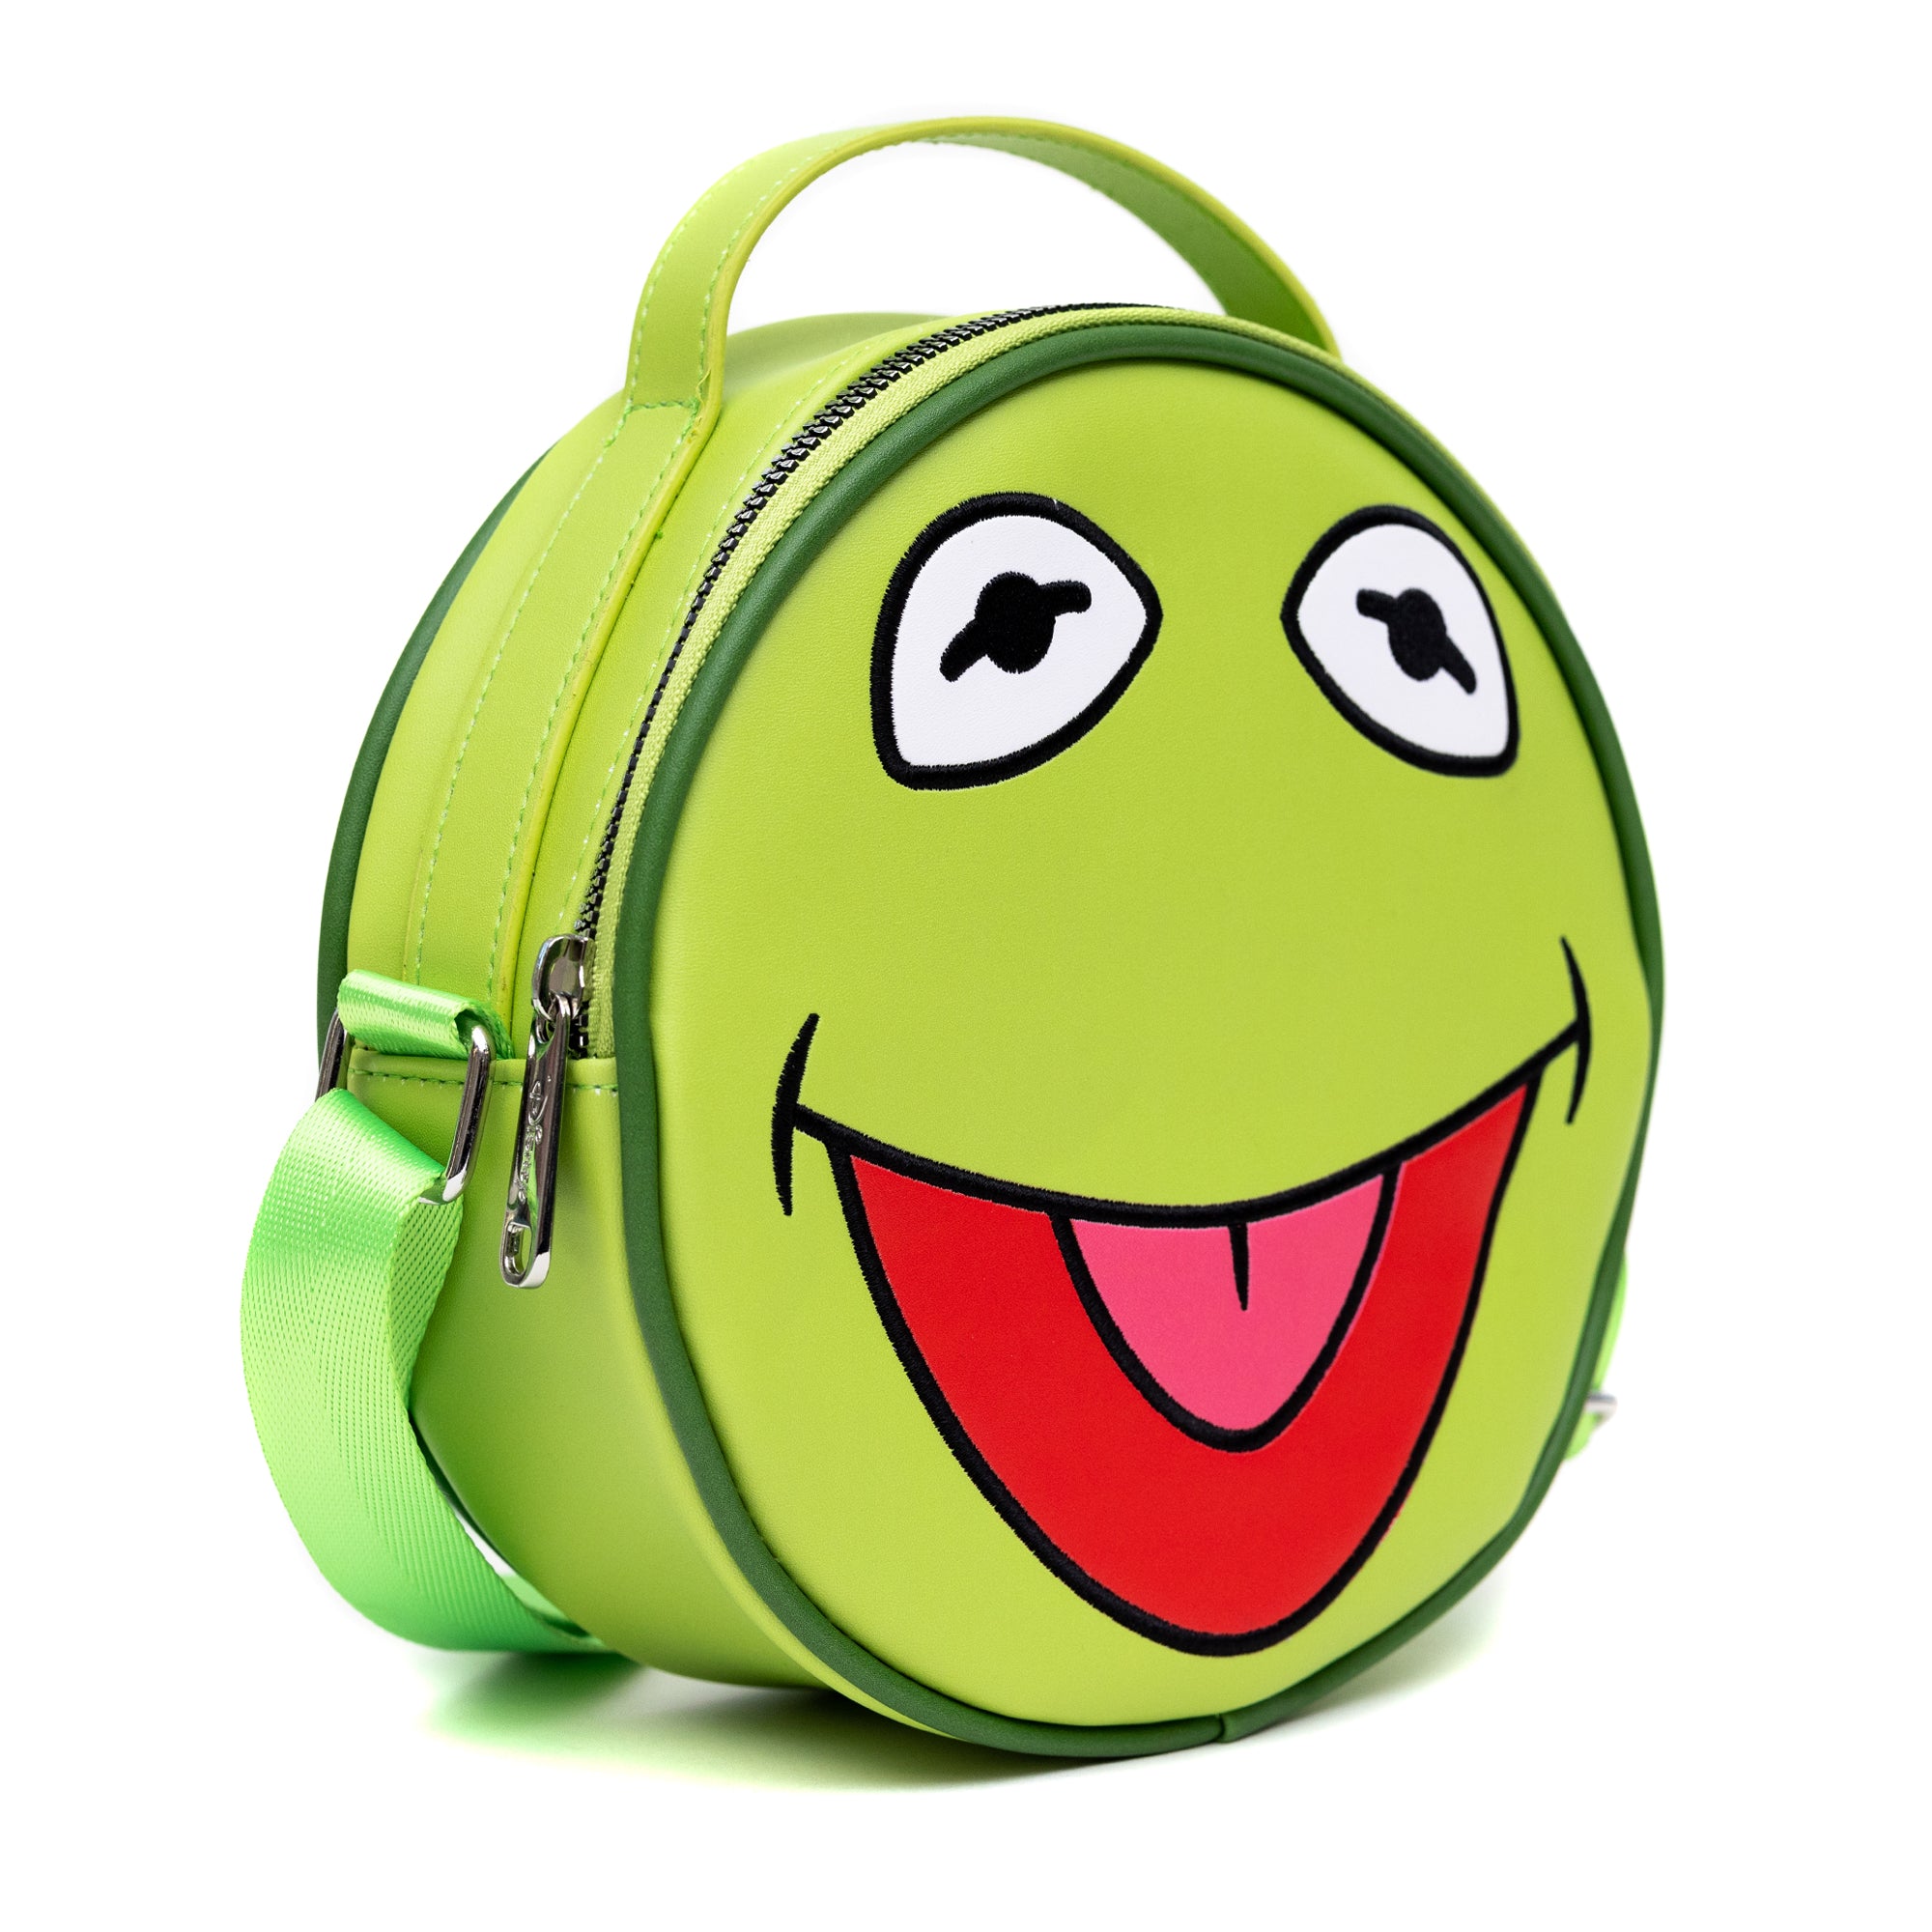 The Muppets Kermit the Frog Crossbody Bag